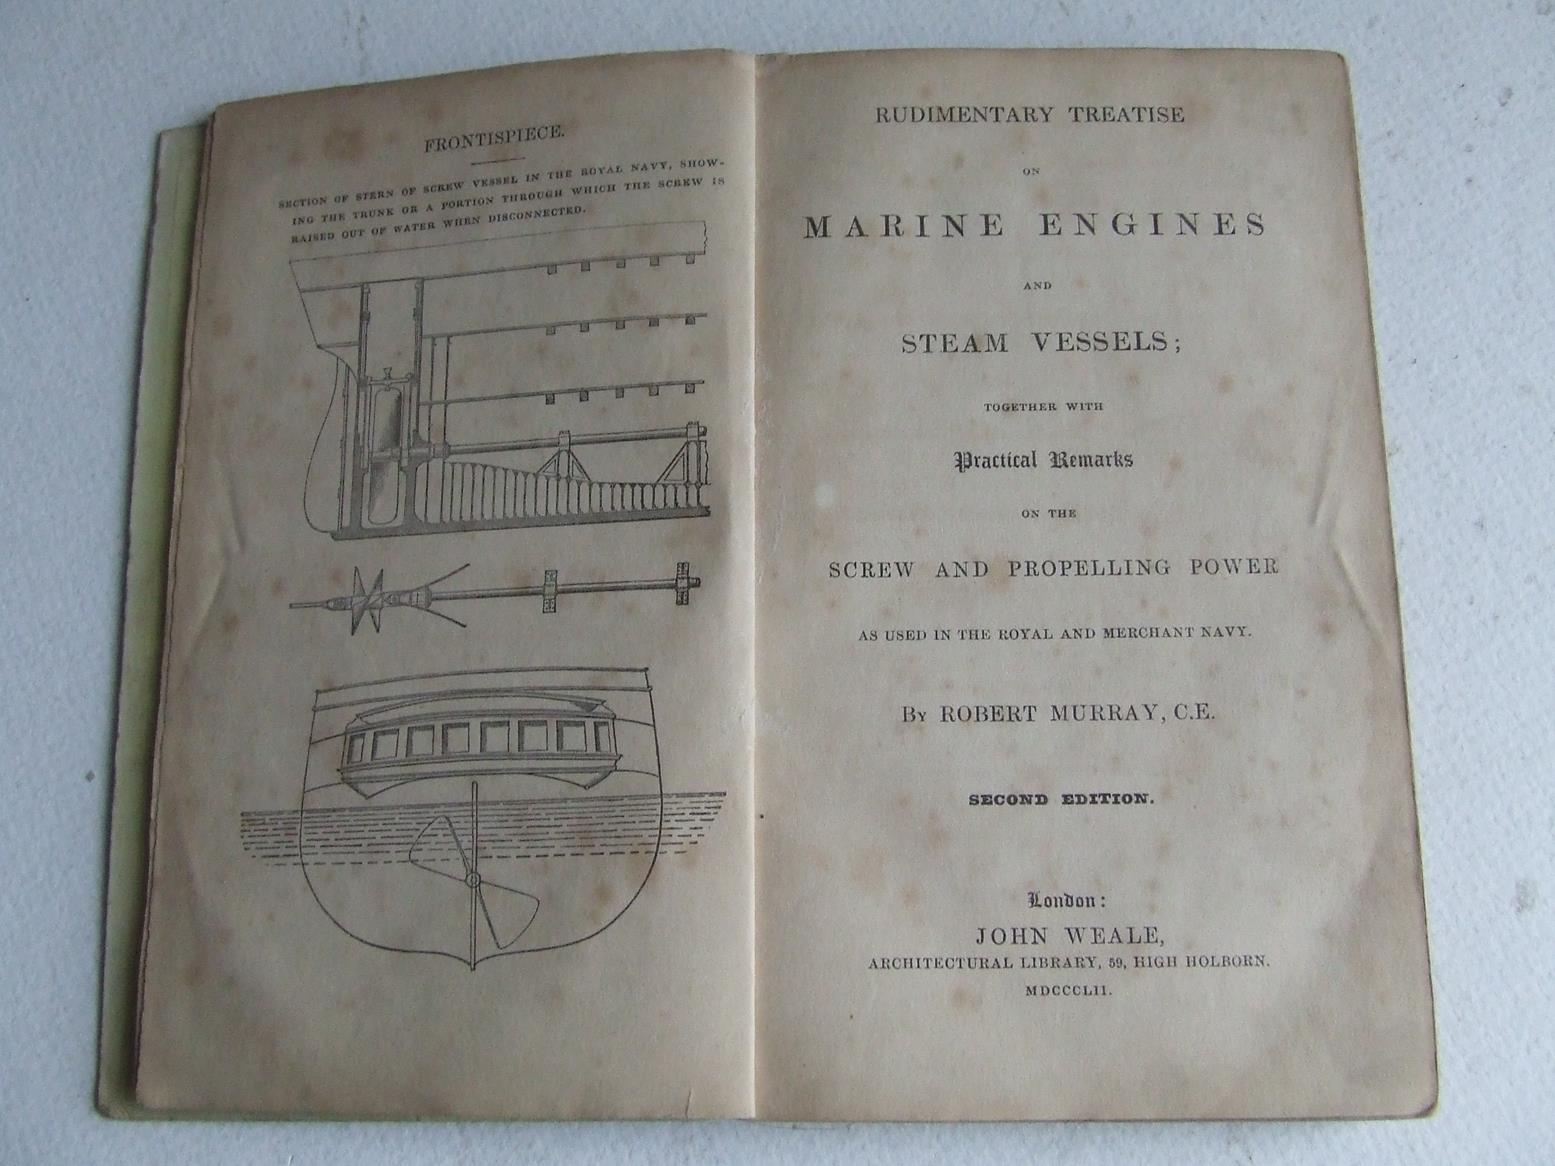 Rudimentary Treatise on Marine Engines and Steam Vessels; together with practical remarks on the screw and propelling power as used in the Royal and Merchant Navy. second edition. - Murray, Robert